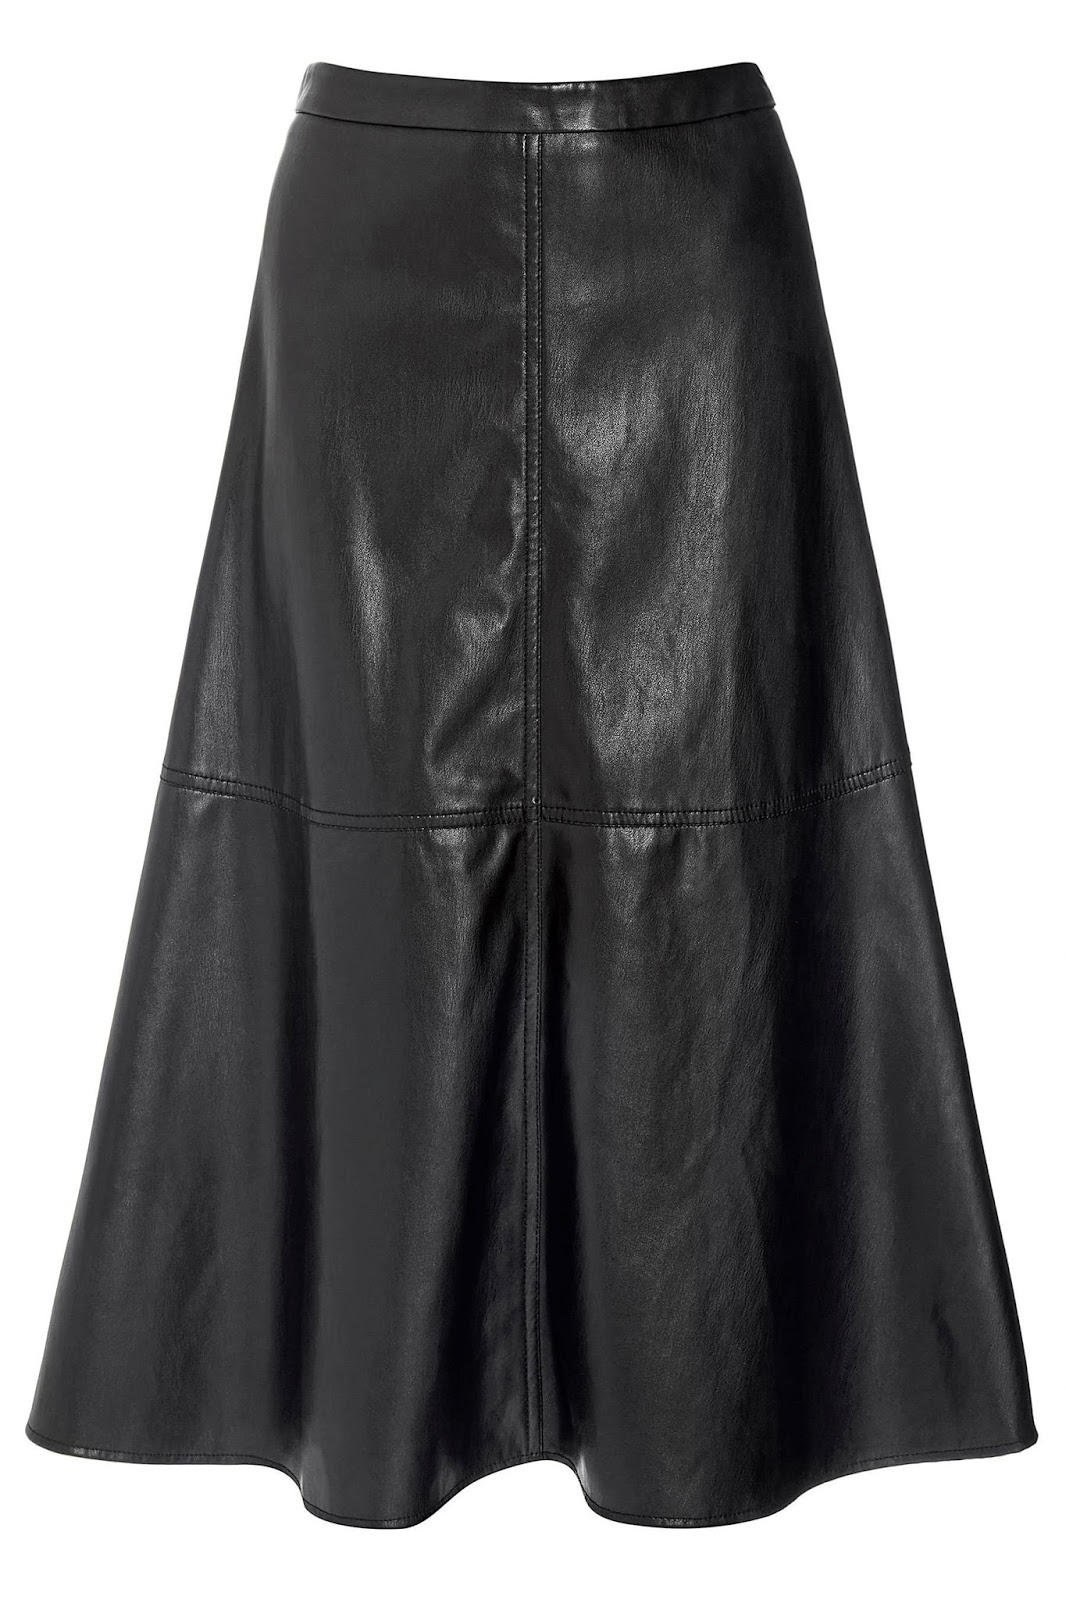 Frugal buy: Next faux leather skirt - The Frugality